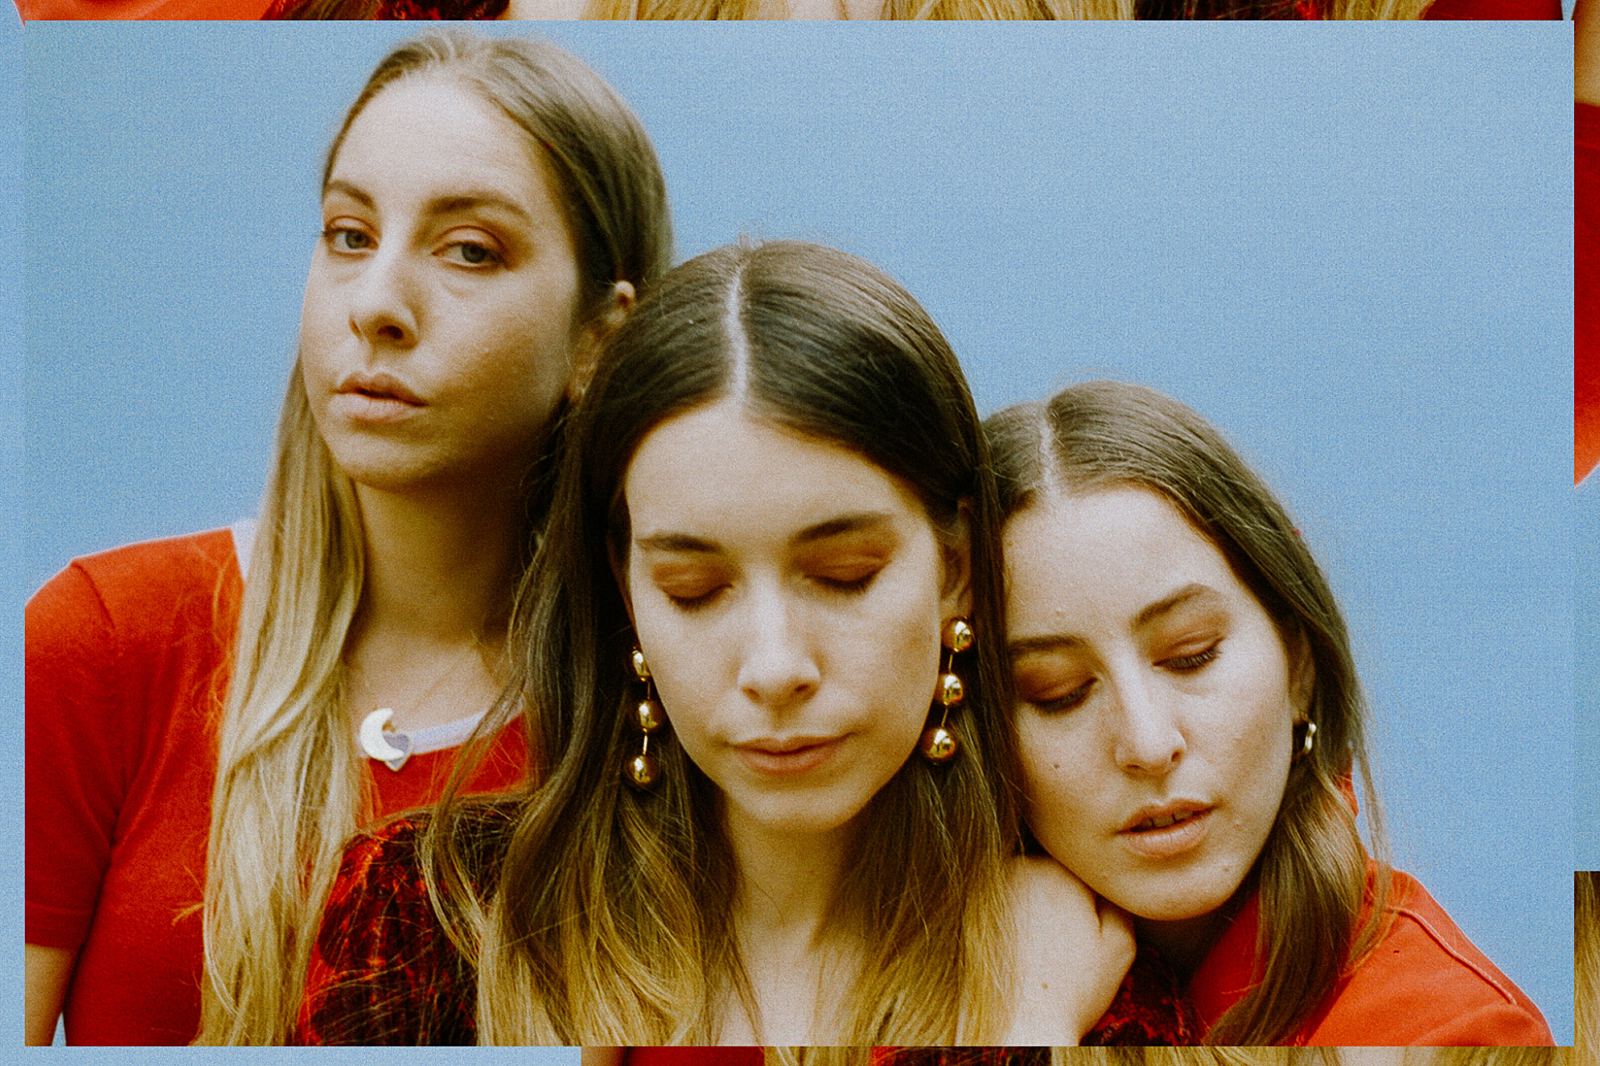 Haim's Coachella set will feature visuals from Paul Thomas Anderson